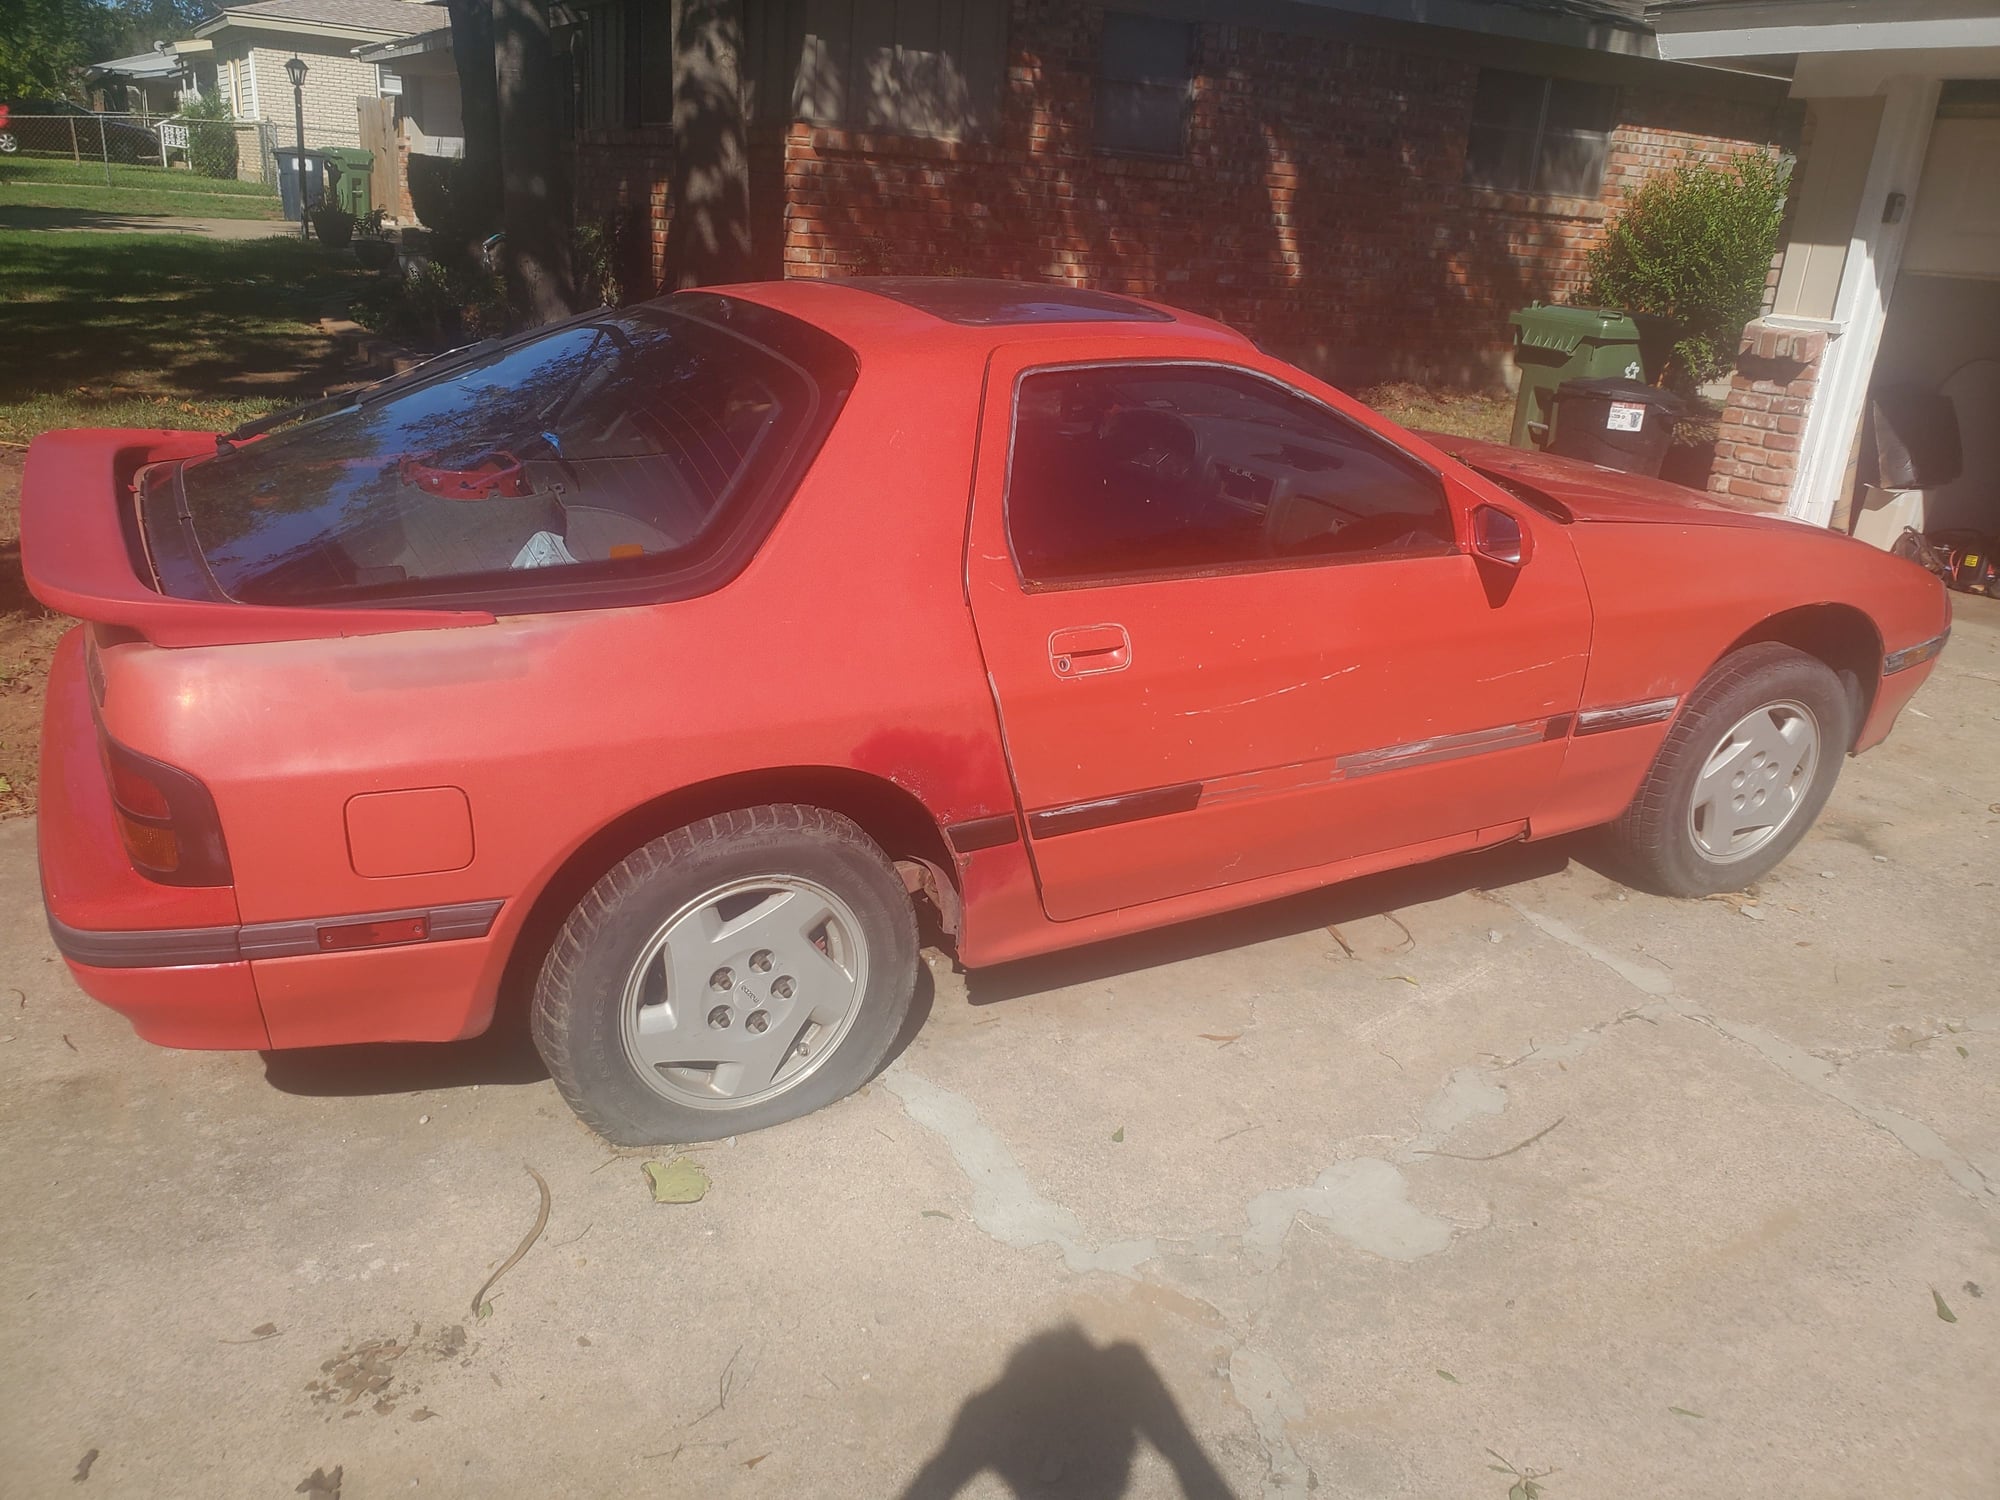 1987 Mazda RX-7 - 1987 S4 Turbo II Shell w/ parts - Used - VIN JM1FC332XH0141024 - 83,000 Miles - Other - 2WD - Manual - Coupe - Red - Hurst, TX 76053, United States